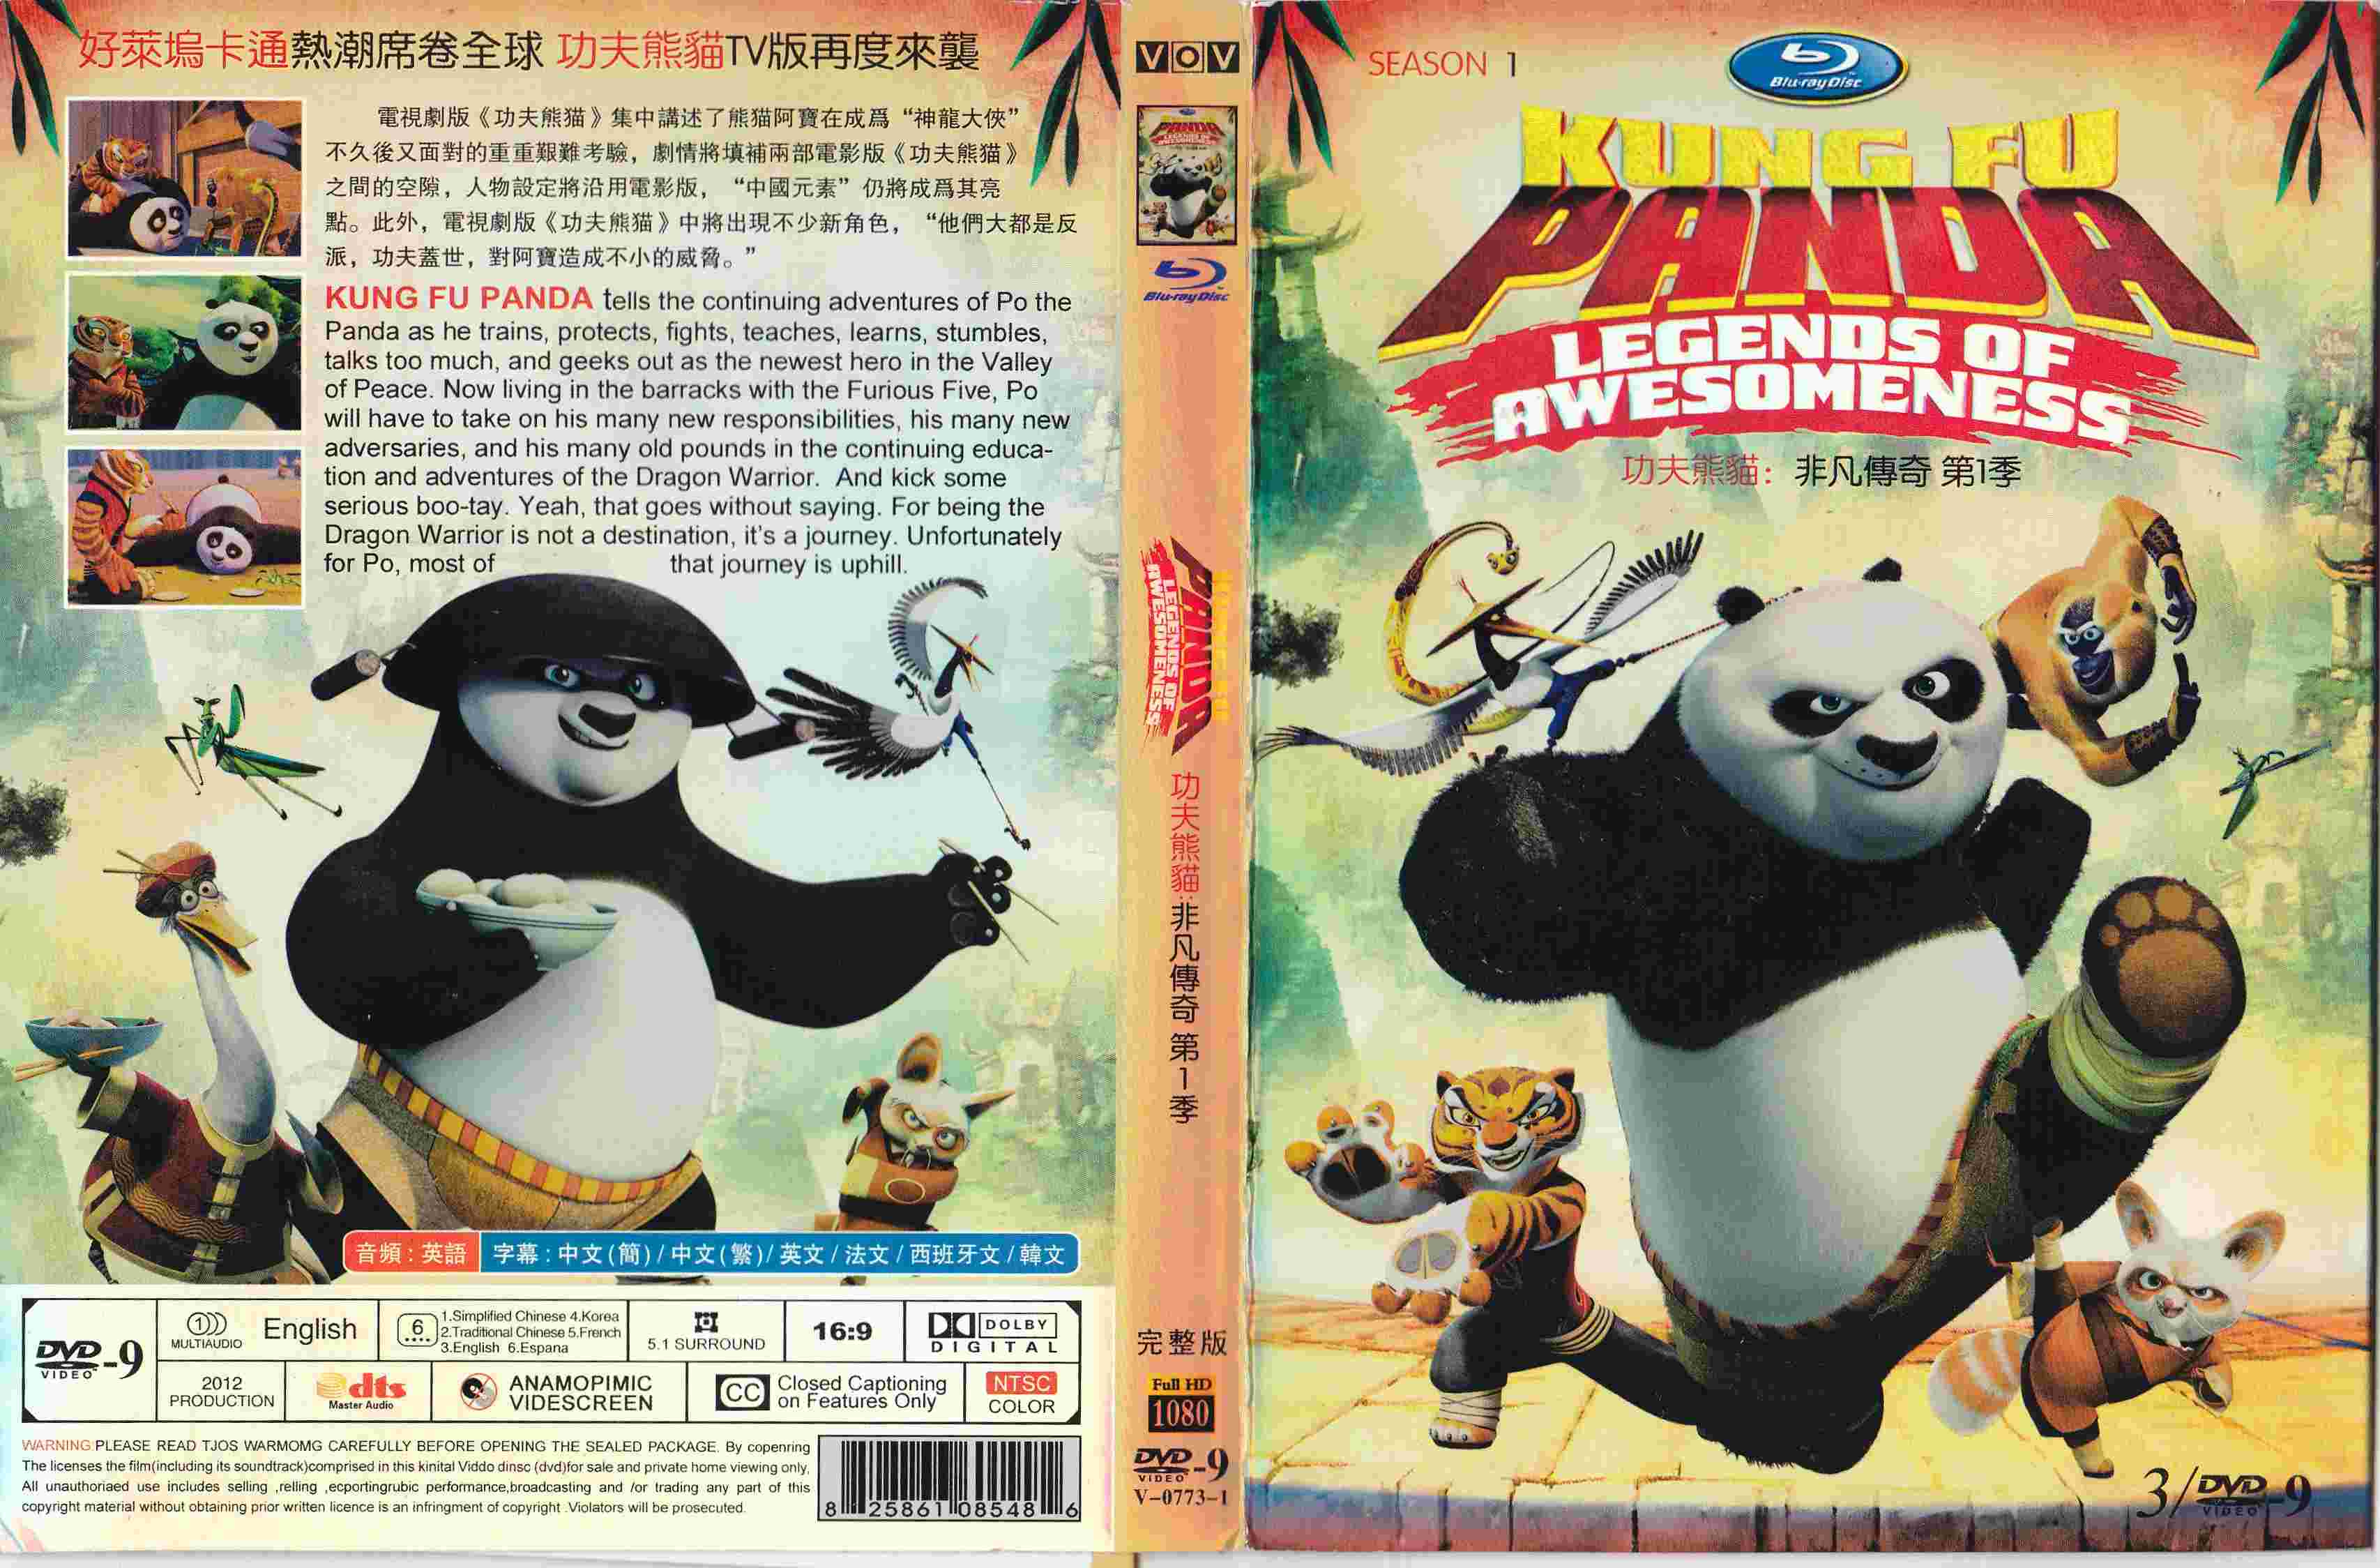 Hear the legends of the kung fu panda! 